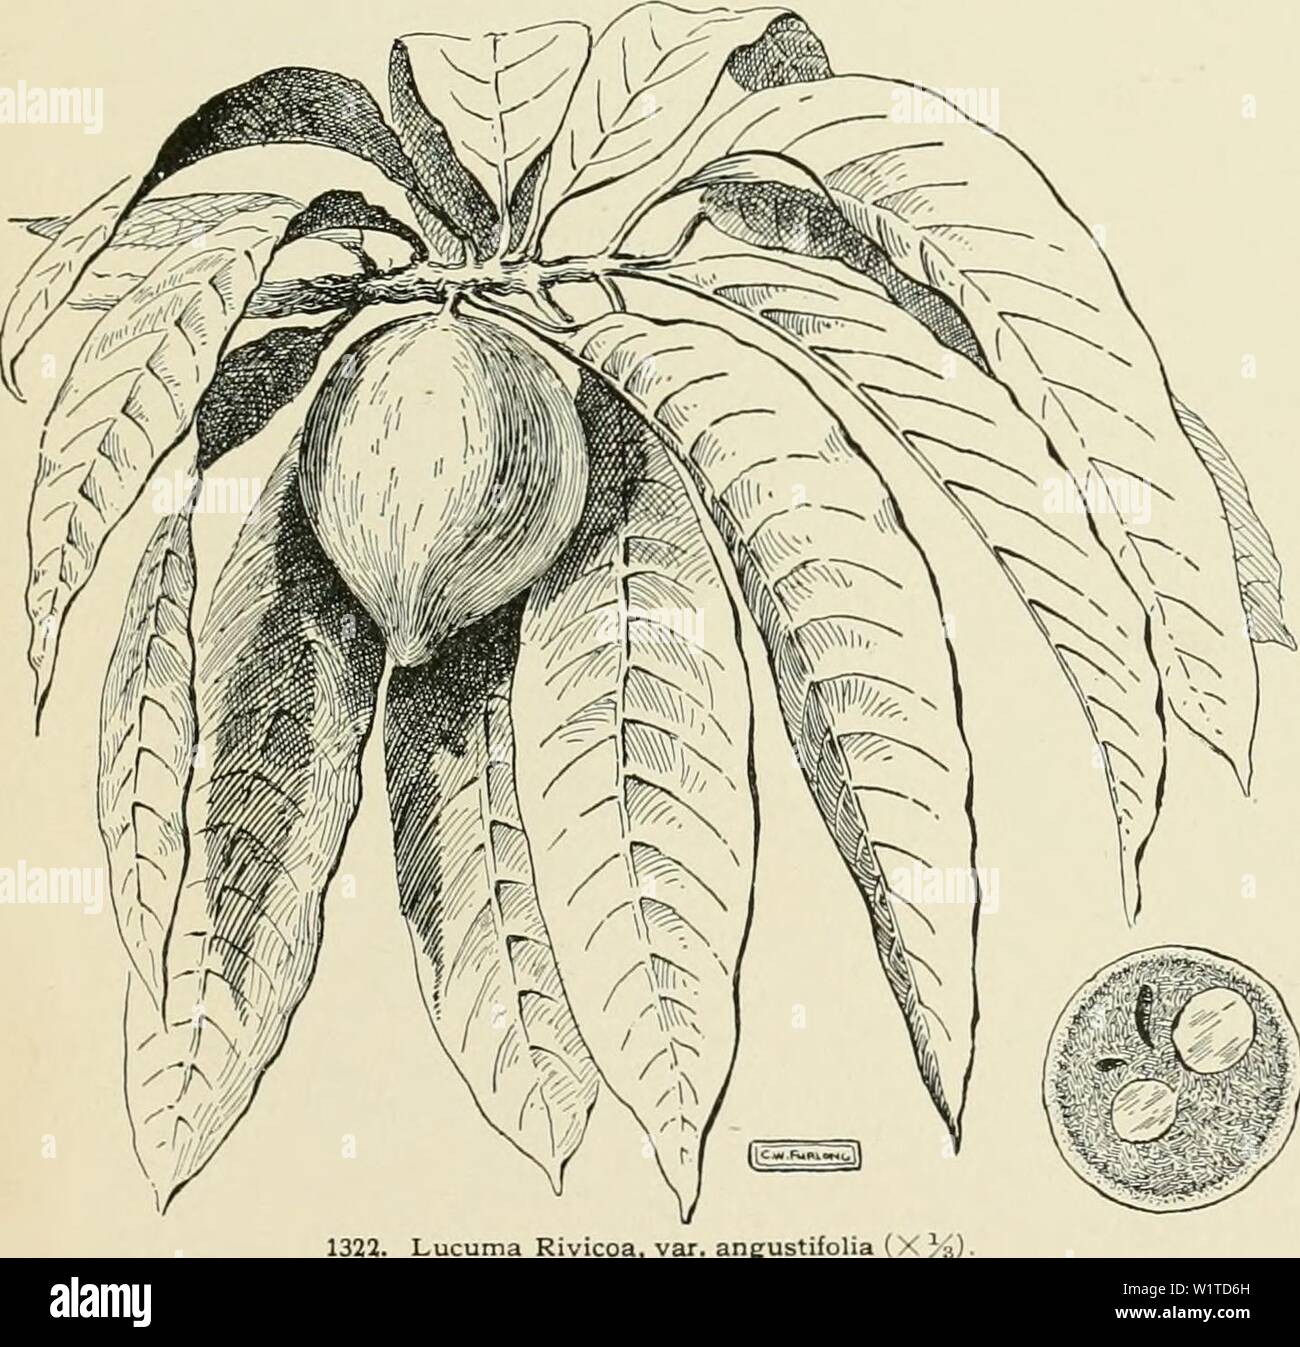 Archive image from page 474 of Cyclopedia of American horticulture, comprising. Cyclopedia of American horticulture, comprising suggestions for cultivation of horticultural plants, descriptions of the species of fruits, vegetables, flowers, and ornamental plants sold in the United States and Canada, together with geographical and biographical sketches  cyclopediaofam02bail Year: 1900 hiiry plant li -2' ft til lvs somewhat coidate or 1 irregul-iih toothed stilktd fragrant m lite spmi or 2 in long and so,i„«li,t at the ends ti| j . 1 «itl, tl R H 1857 p 11 -I 1 |u „ There is an i„ 1 im  lvs , al Stock Photo